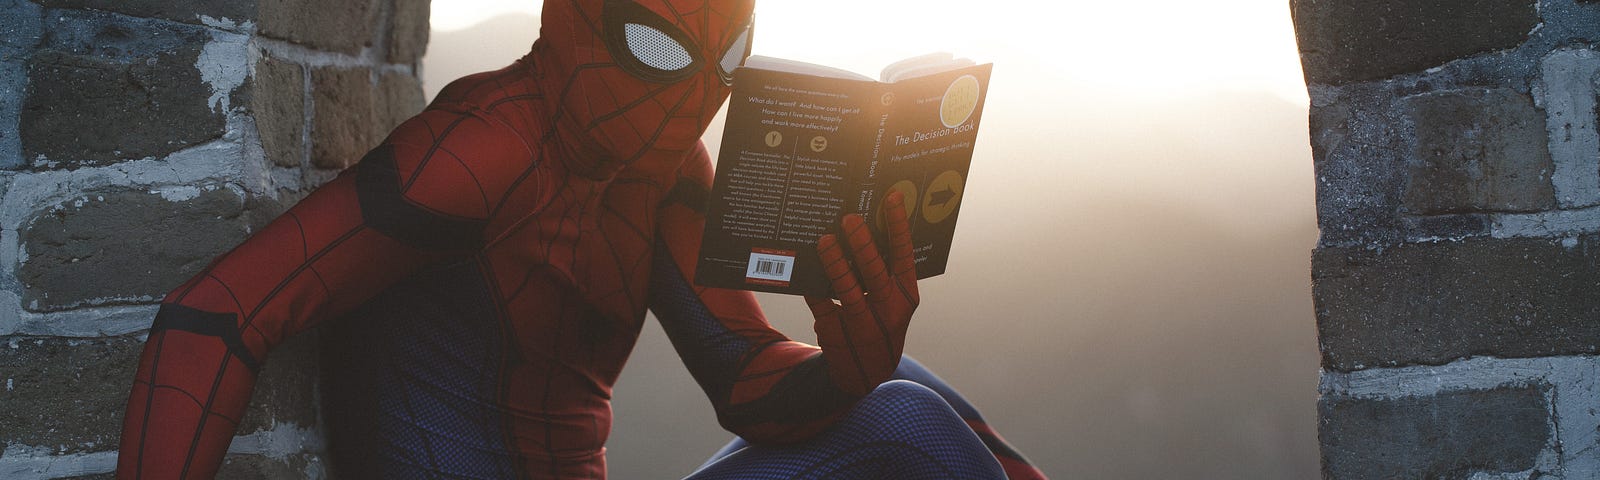 Spiderman reading a book in a balcony